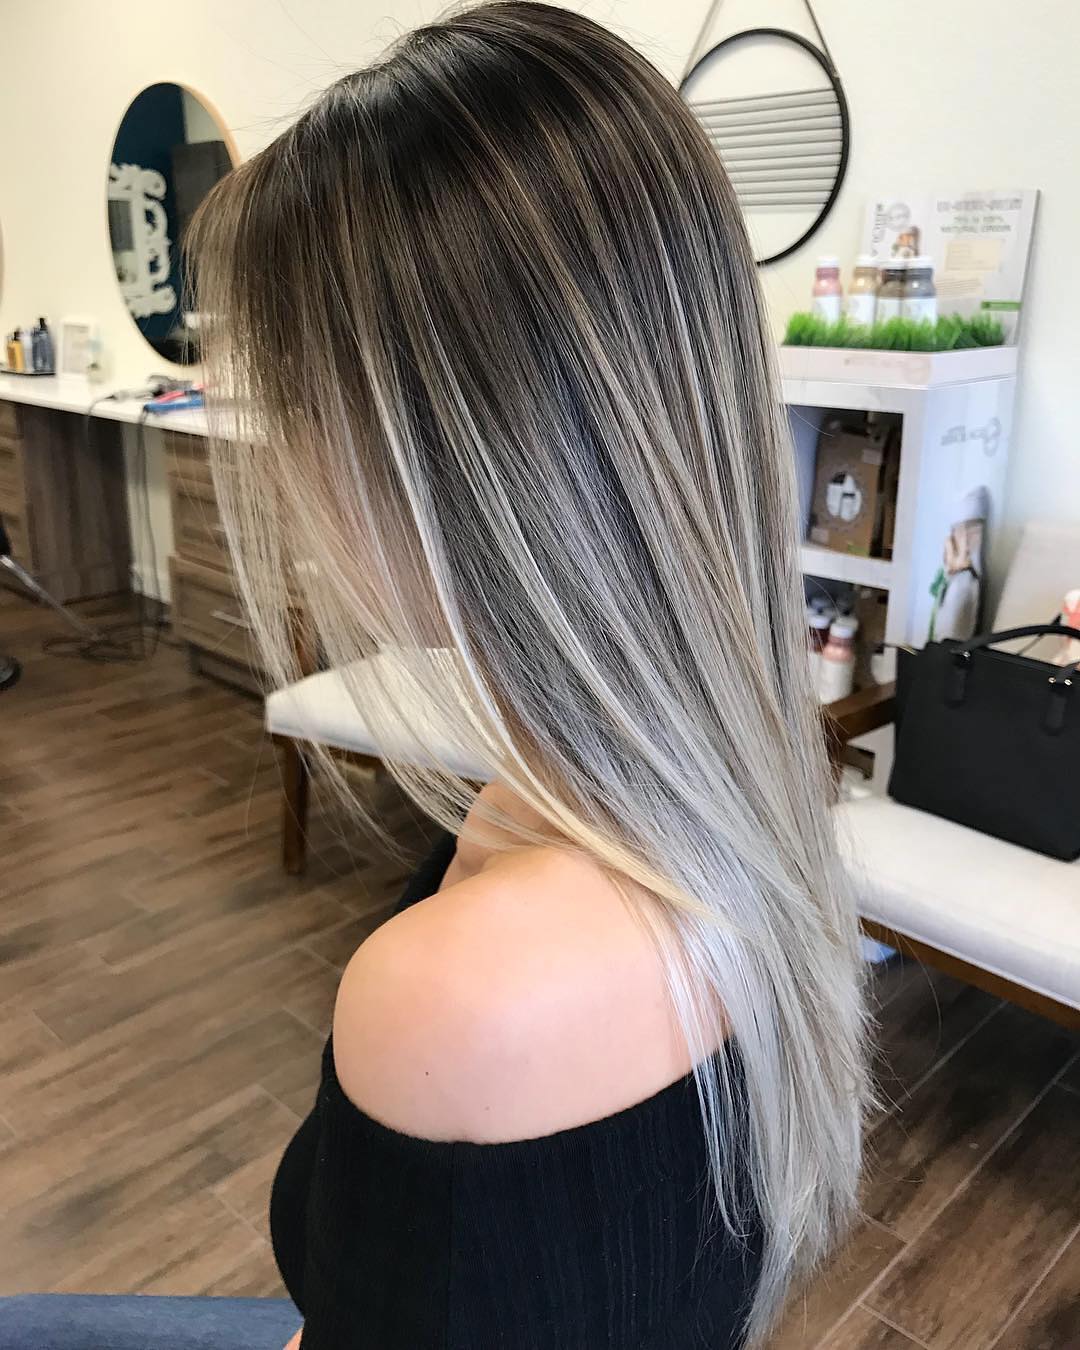 10 Balayage Ombre Long Hair Styles From Subtle To Stunning